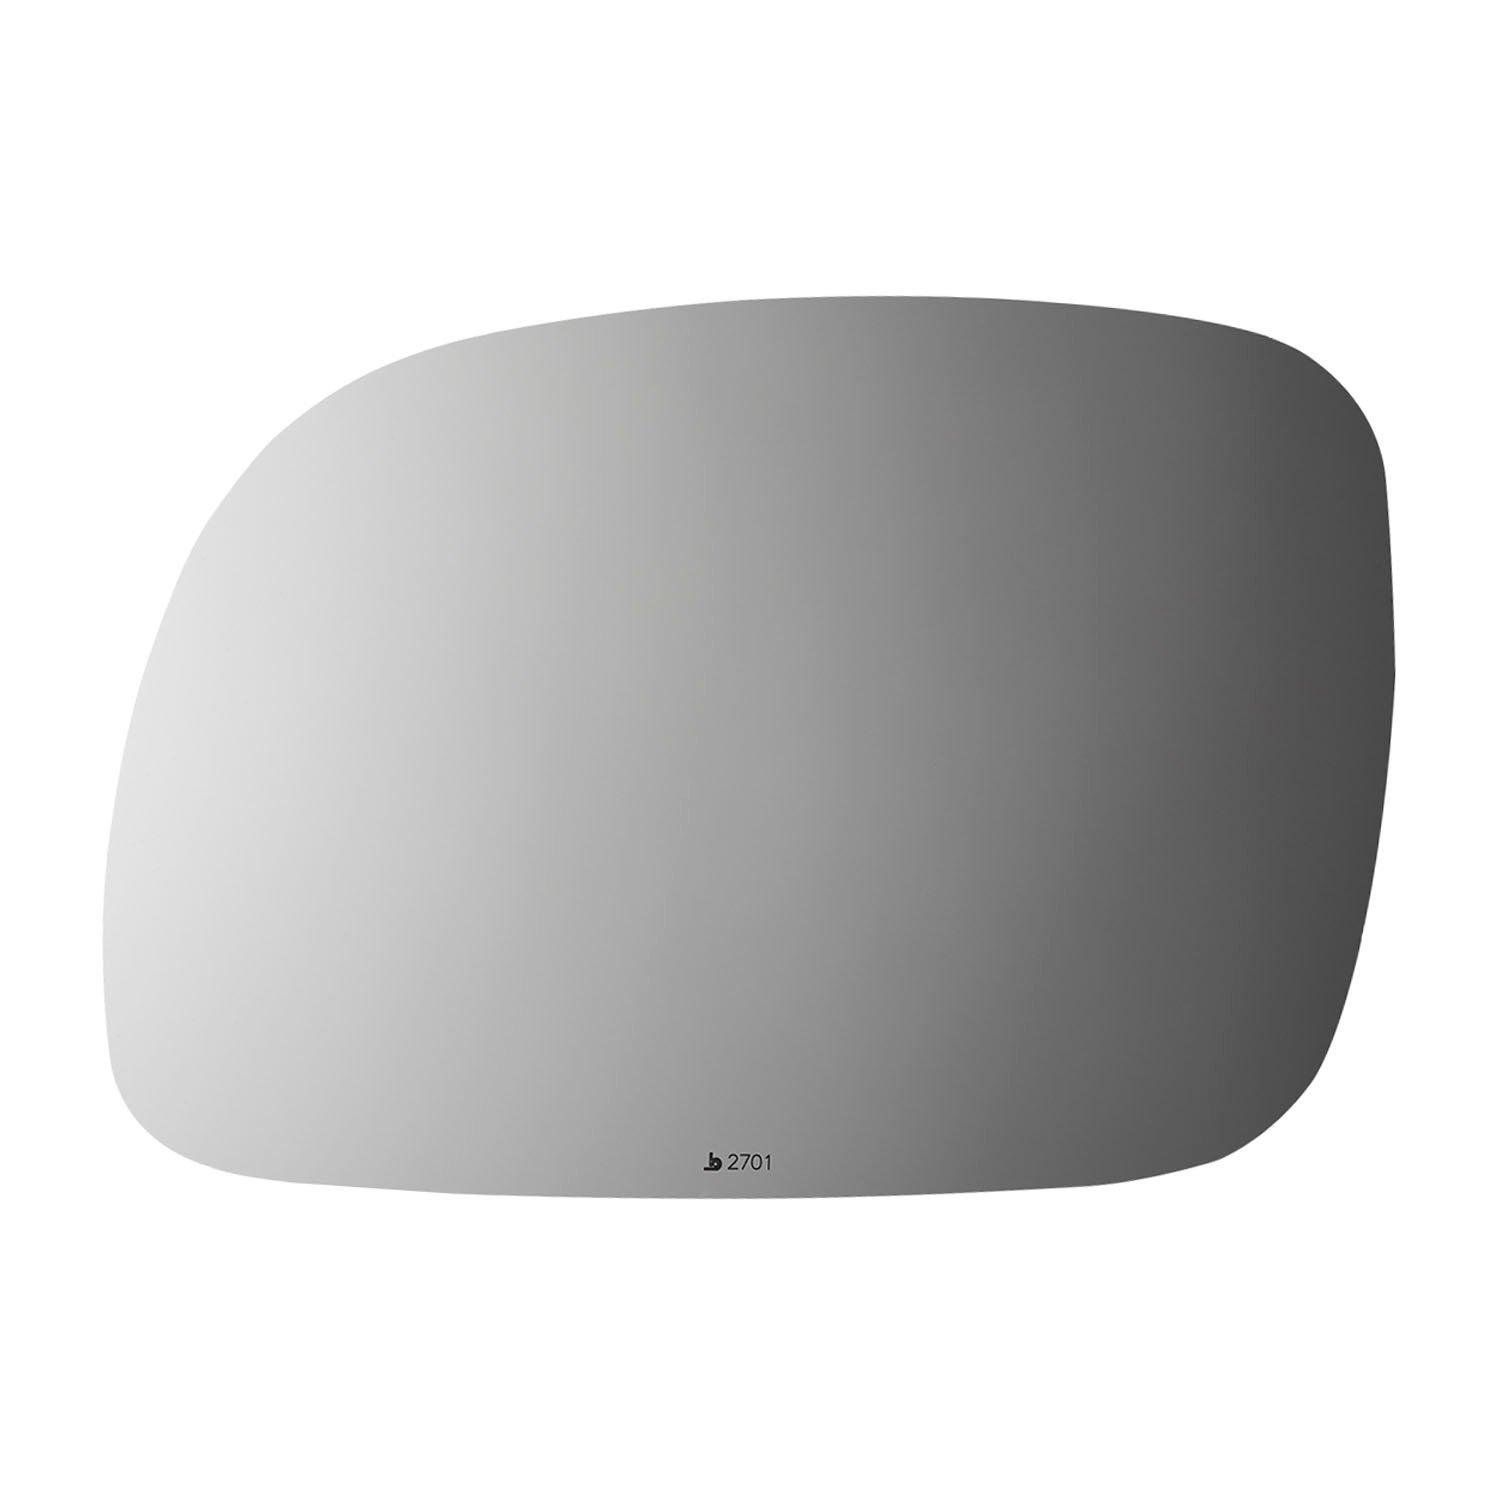 2701 SIDE VIEW MIRROR